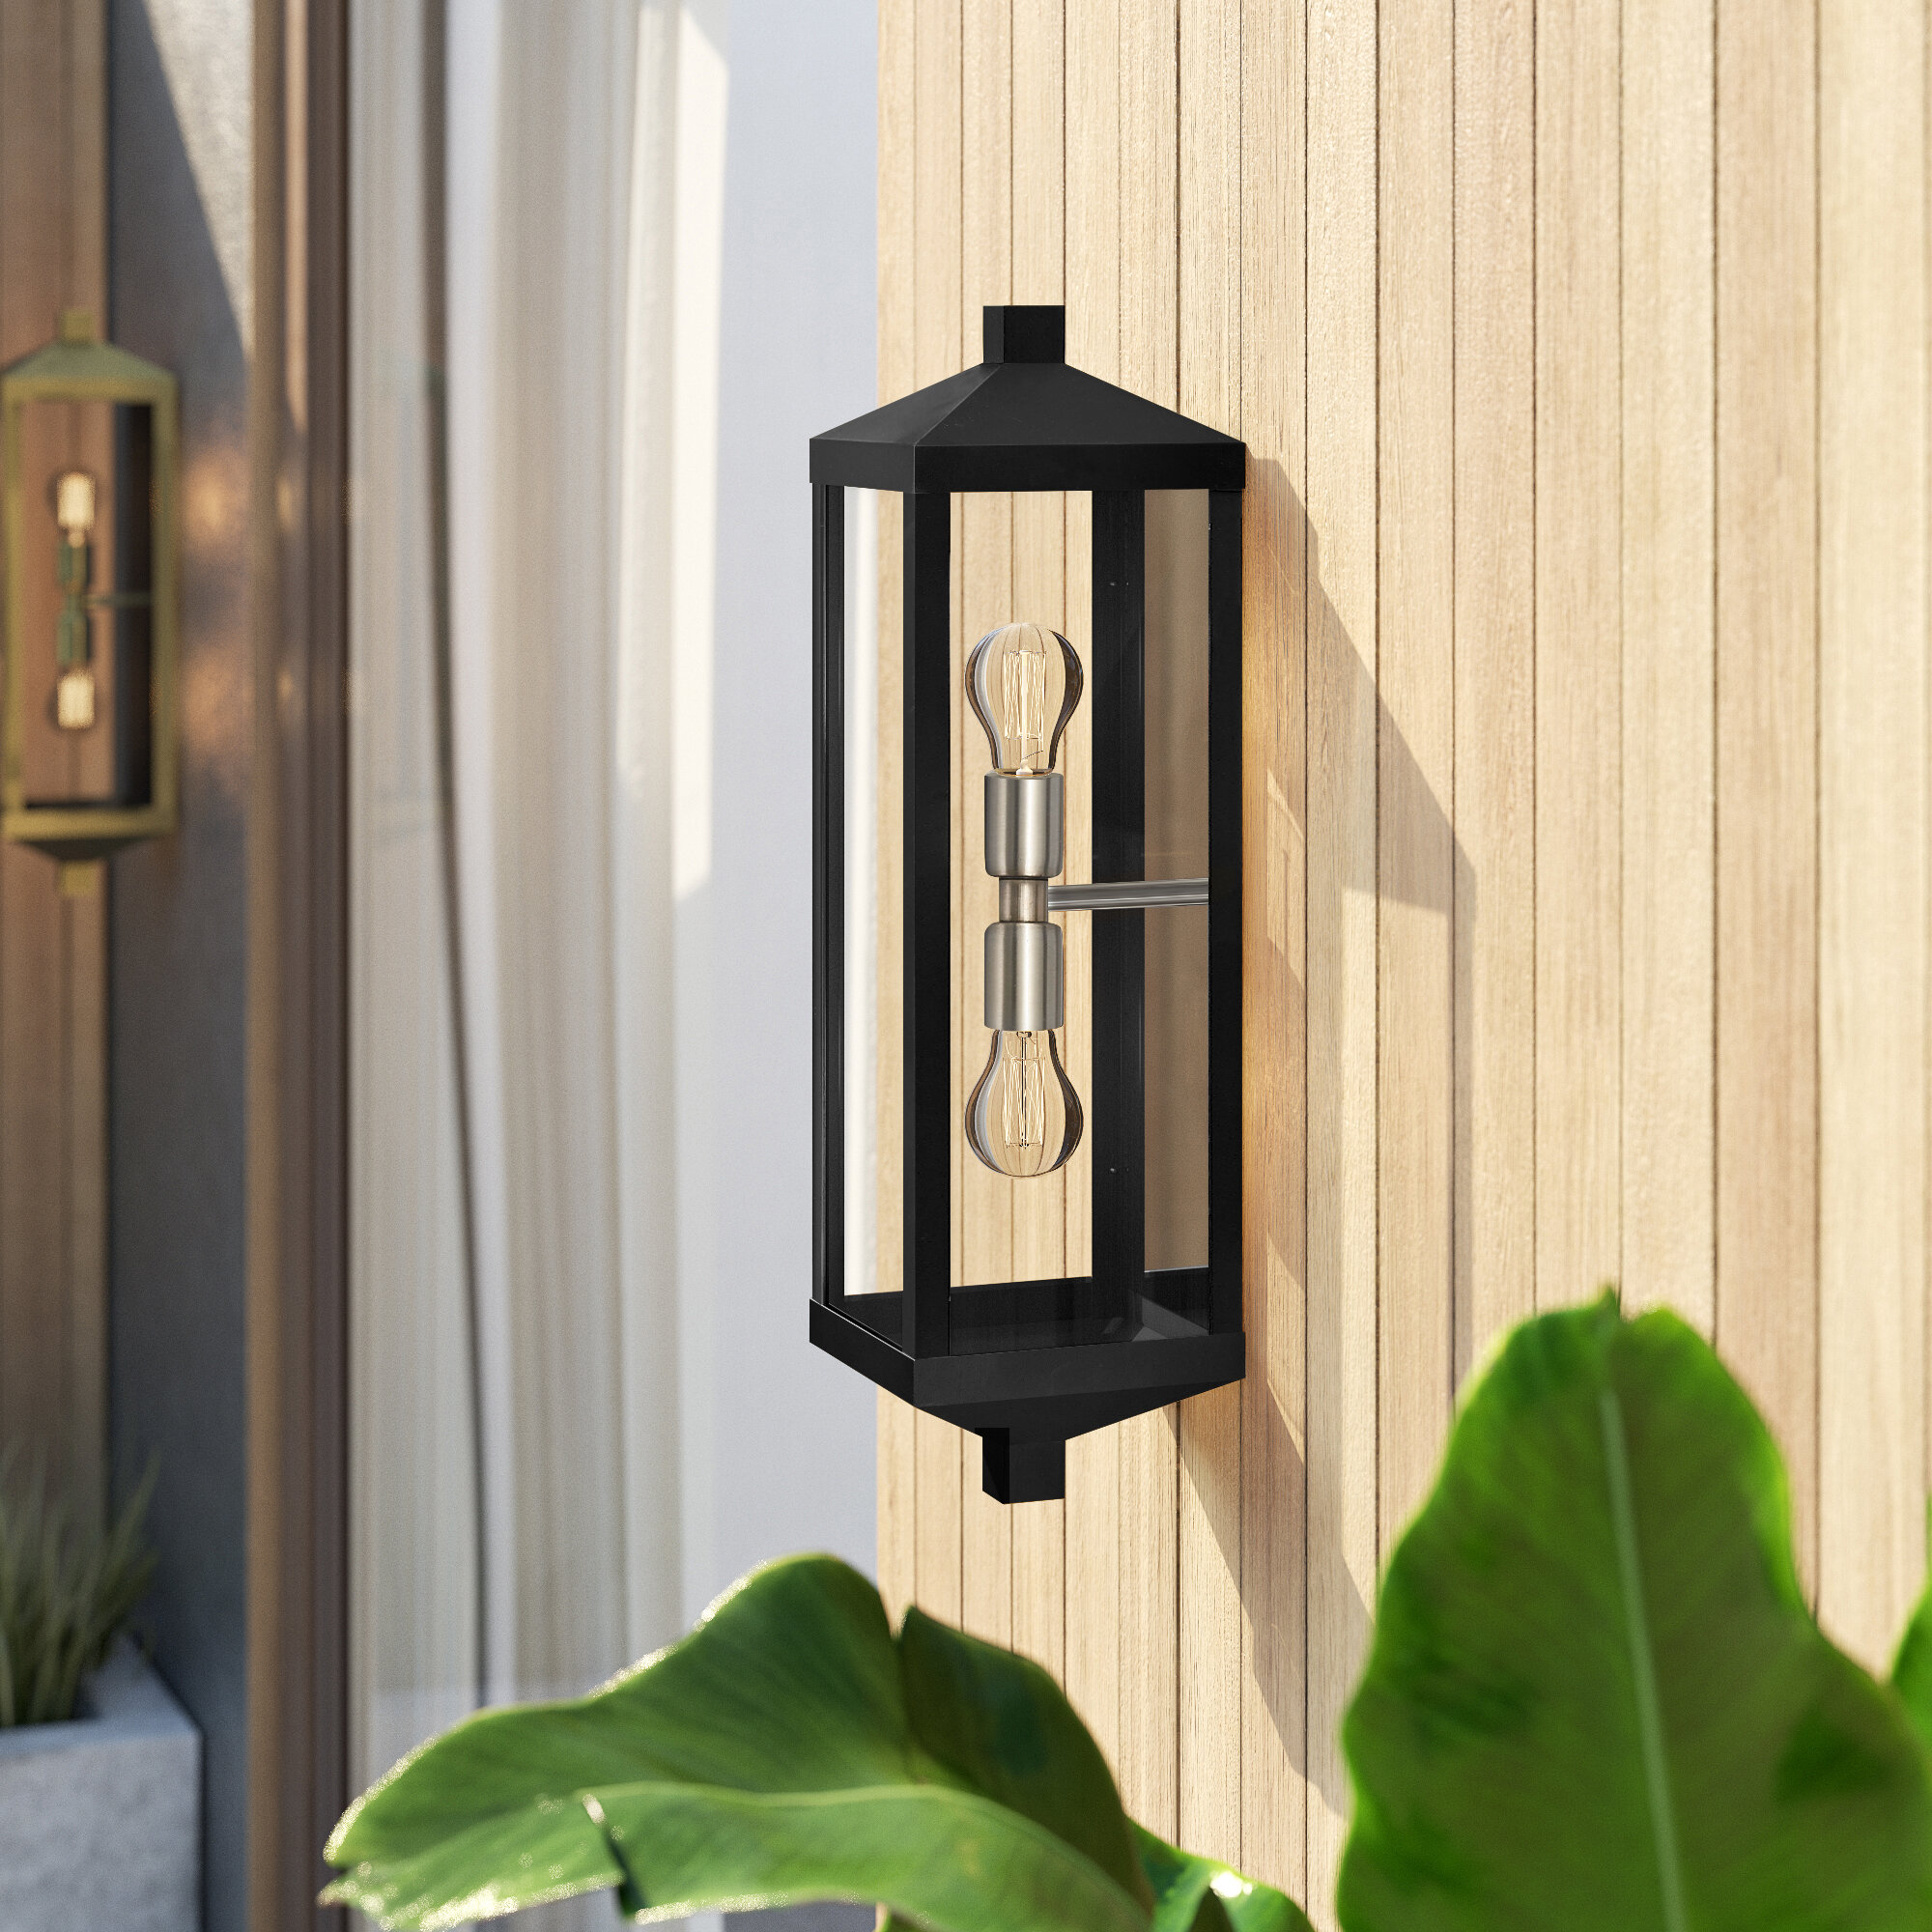 Need Outdoor Sconces Advice?